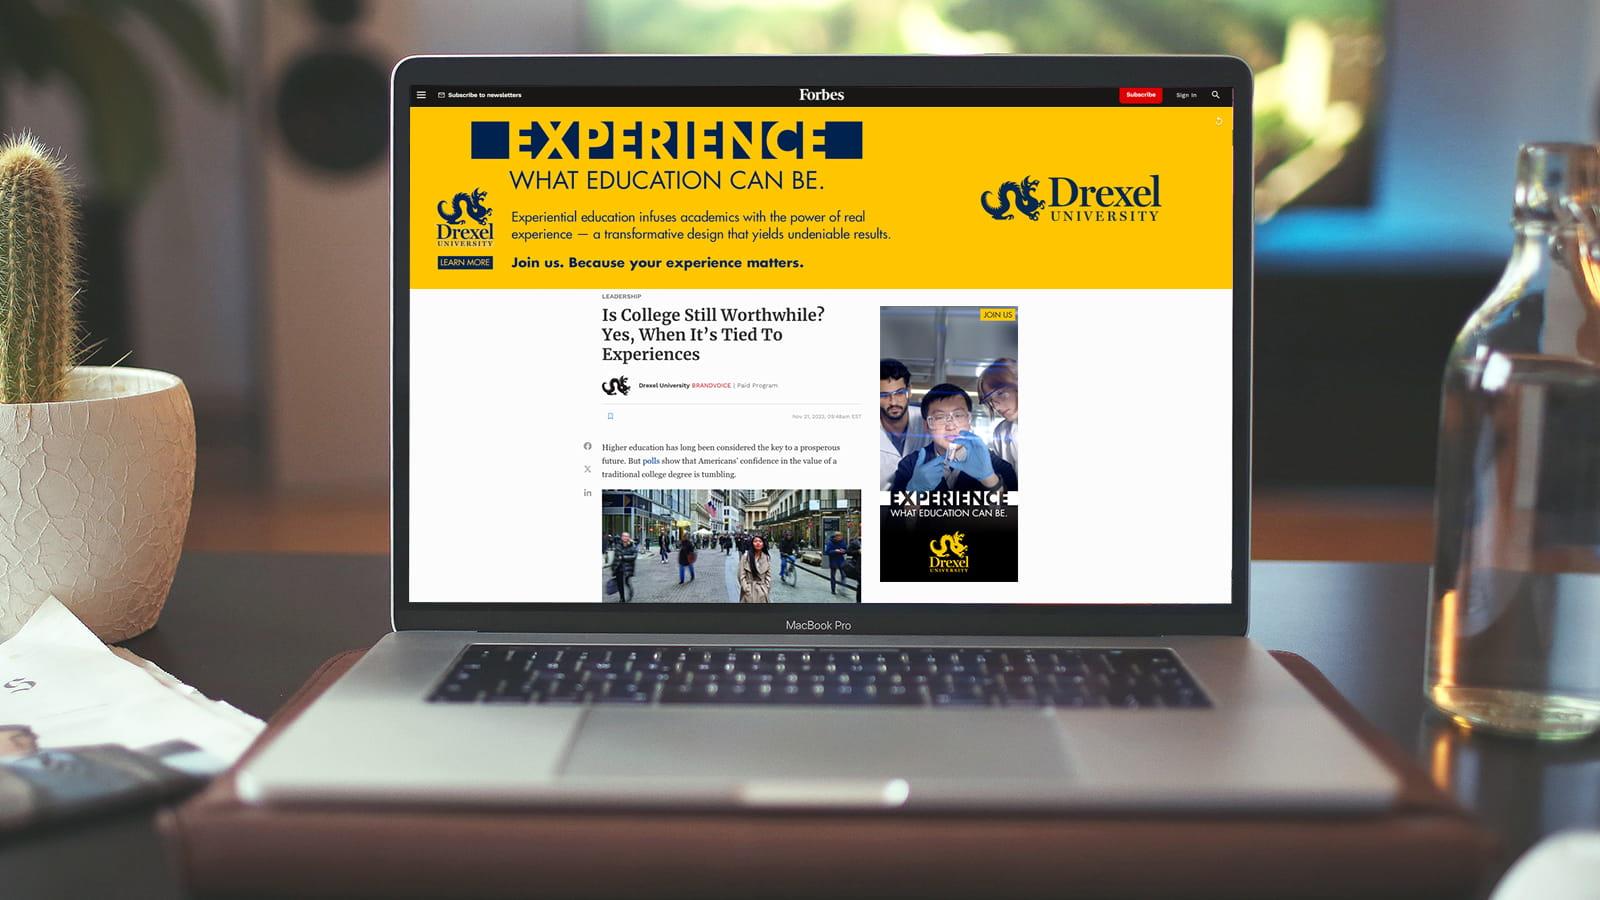 Experience Drexel web banner and video ad